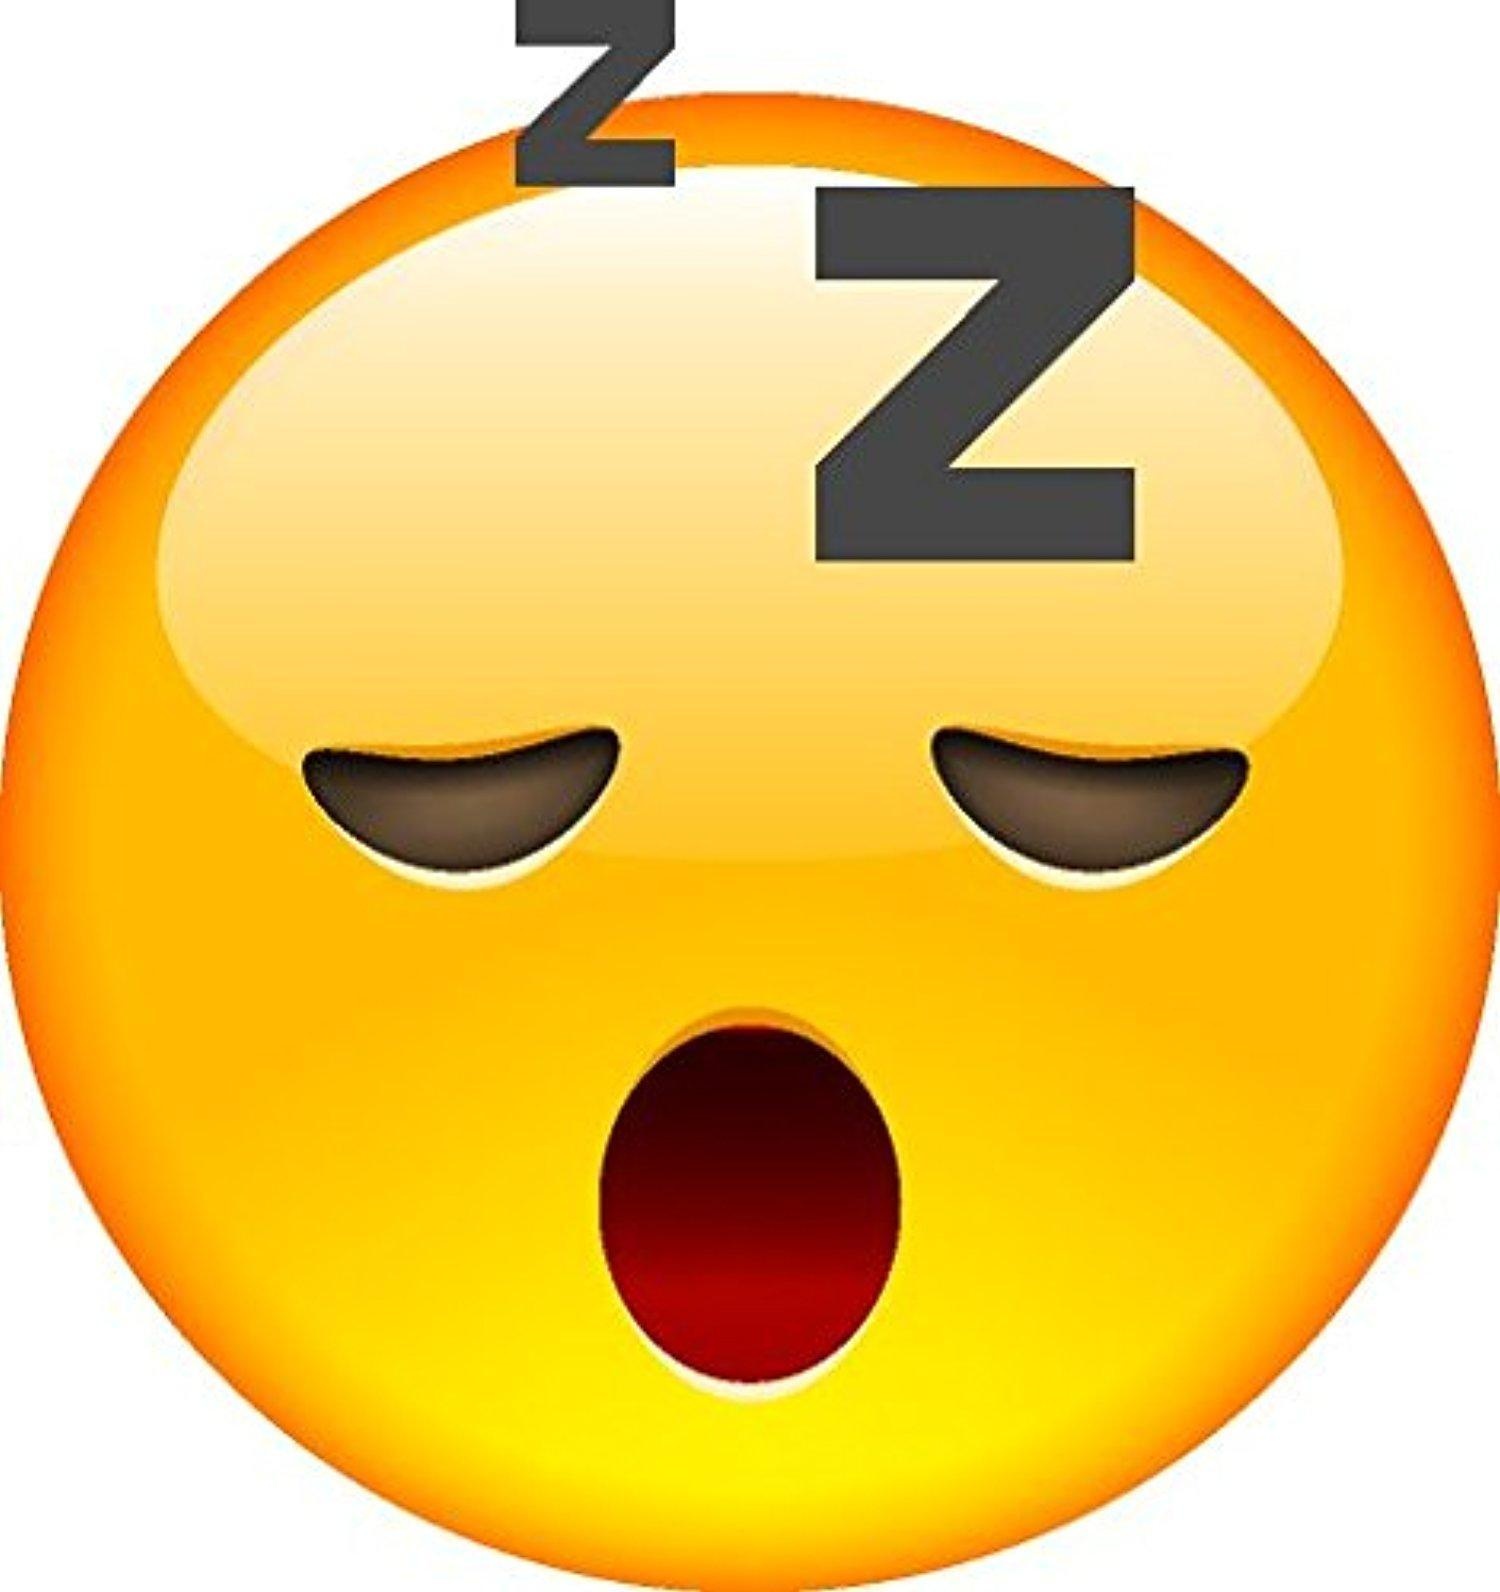 Smiley Face Emoji - Sleeping - Latest & Top Rated